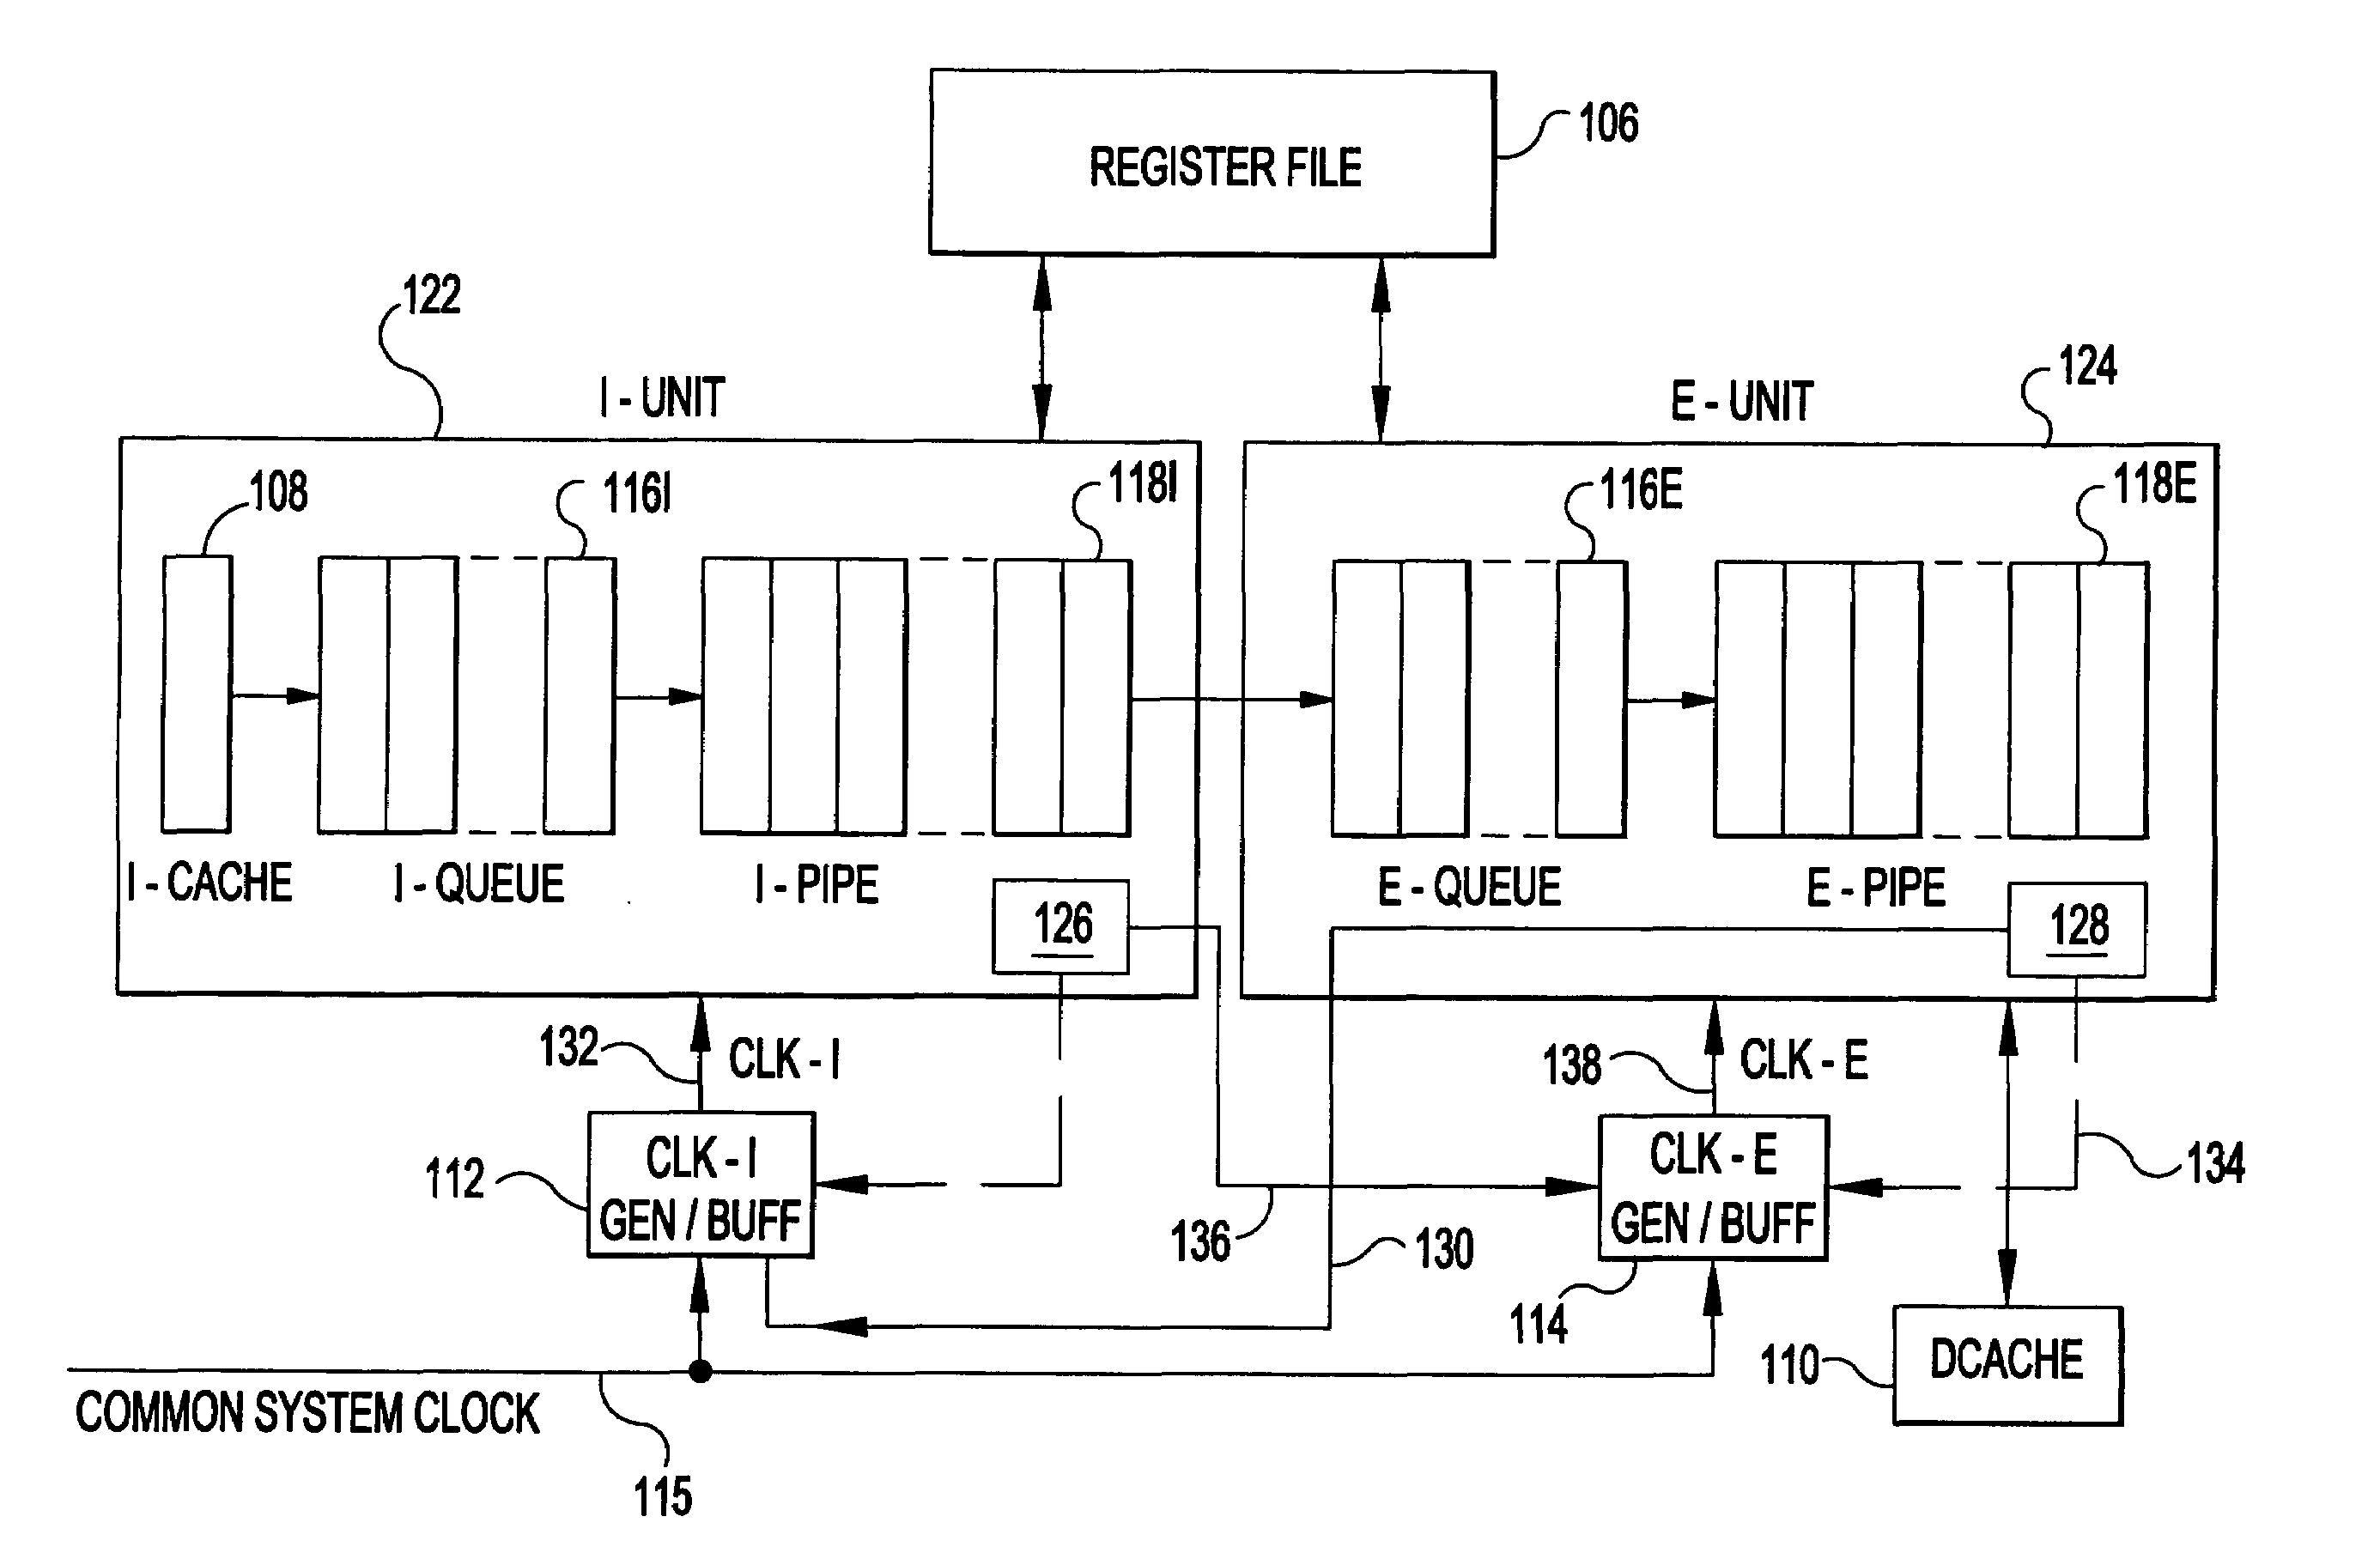 Processor with demand-driven clock throttling power reduction